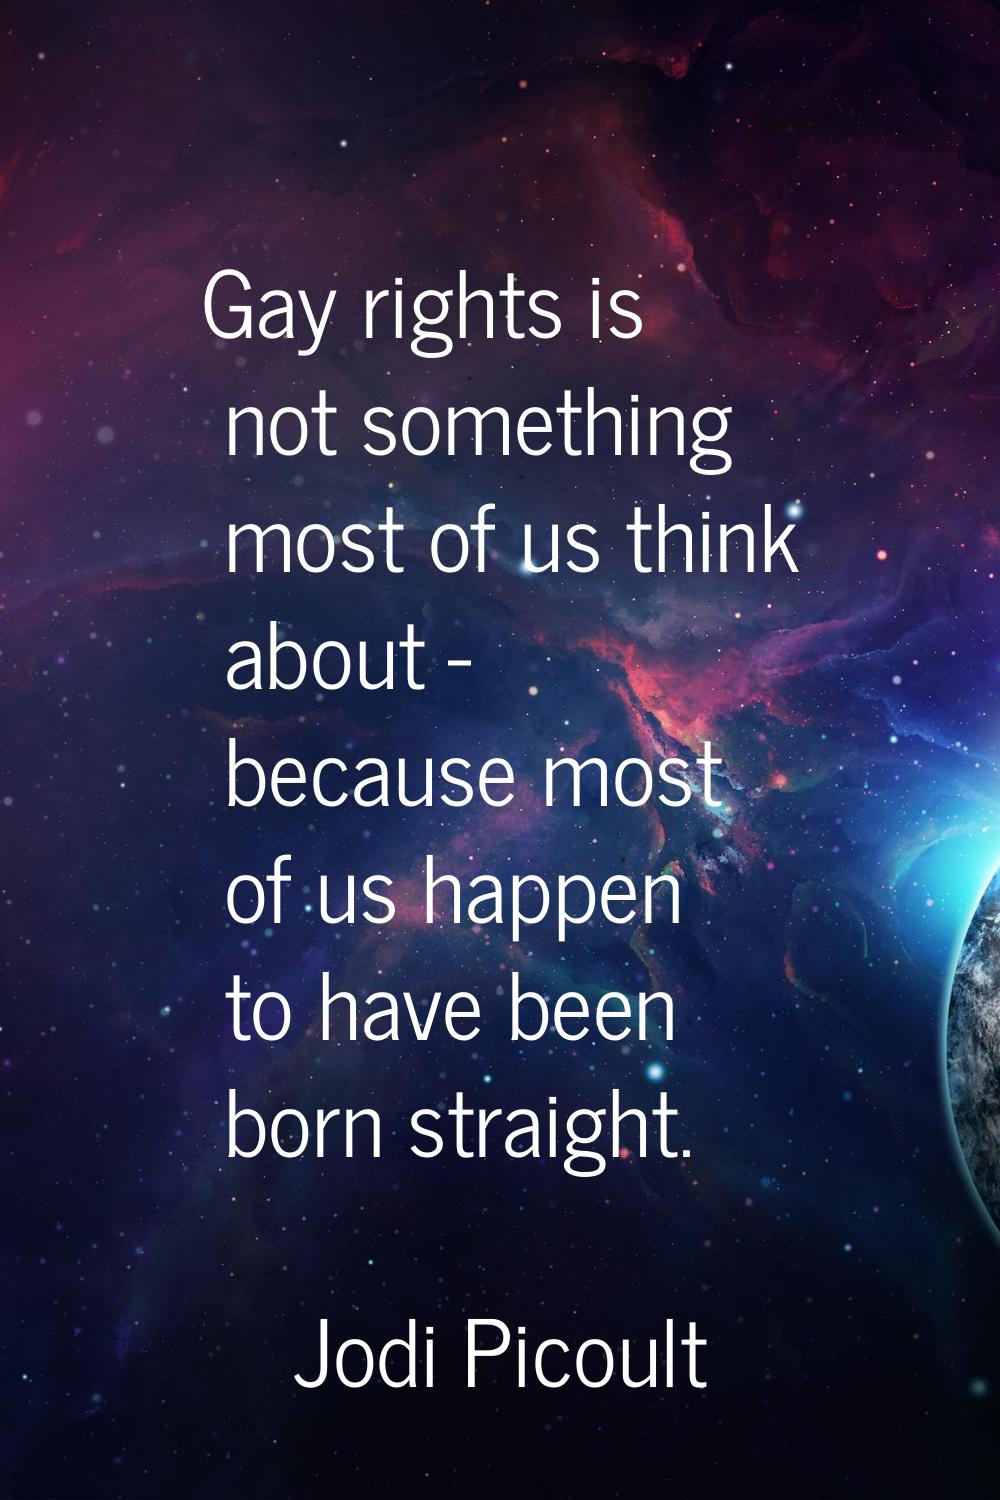 Gay rights is not something most of us think about - because most of us happen to have been born st